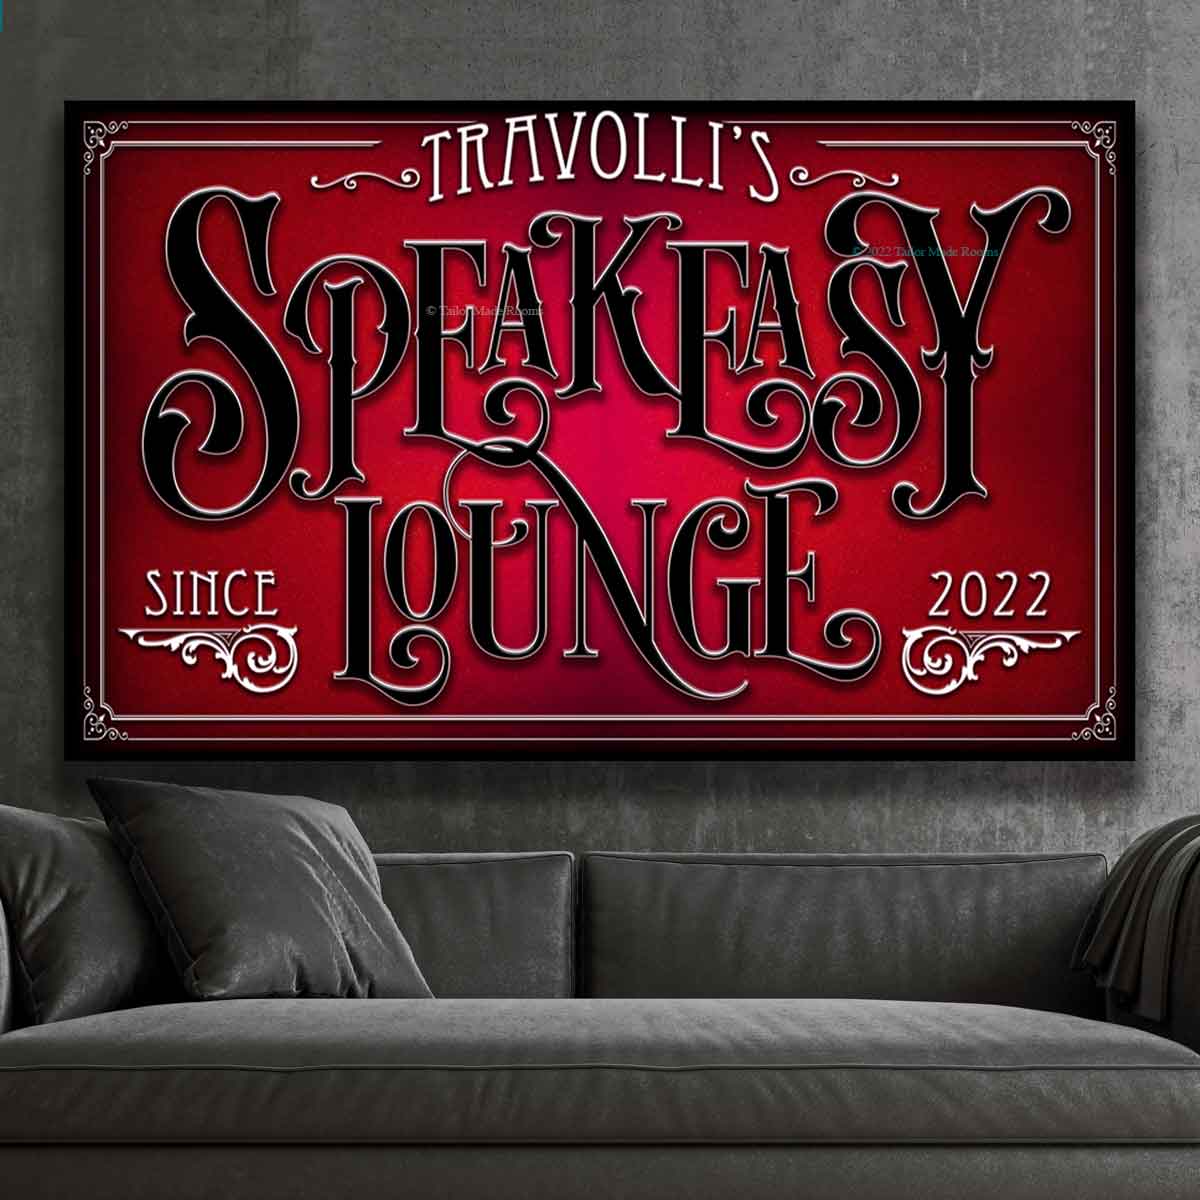 Speakeasy Decor Is a Fun Way to add a Little Adventure to Your Home